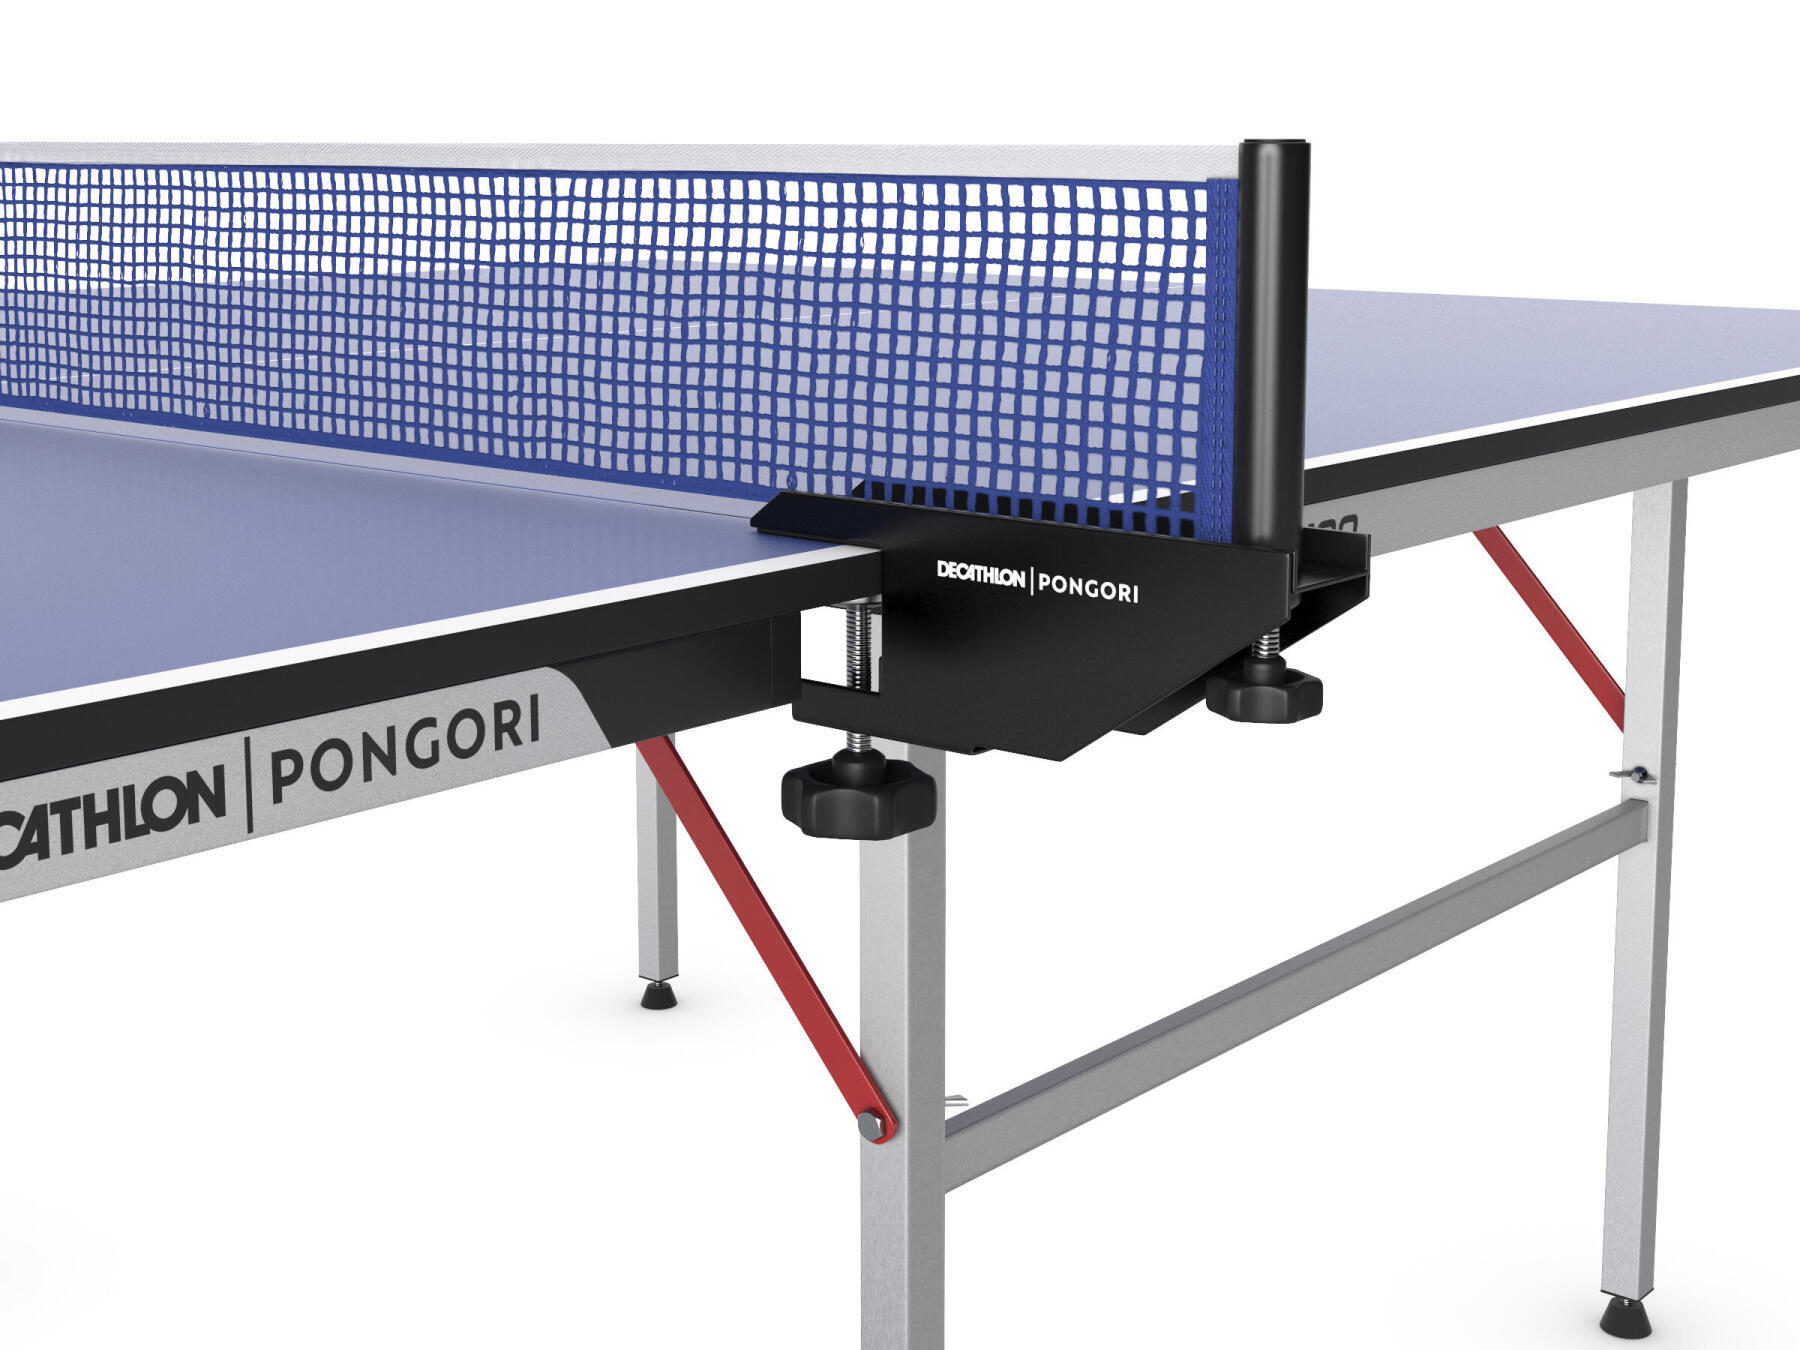 5 Best Places to Play Table Tennis in Singapore